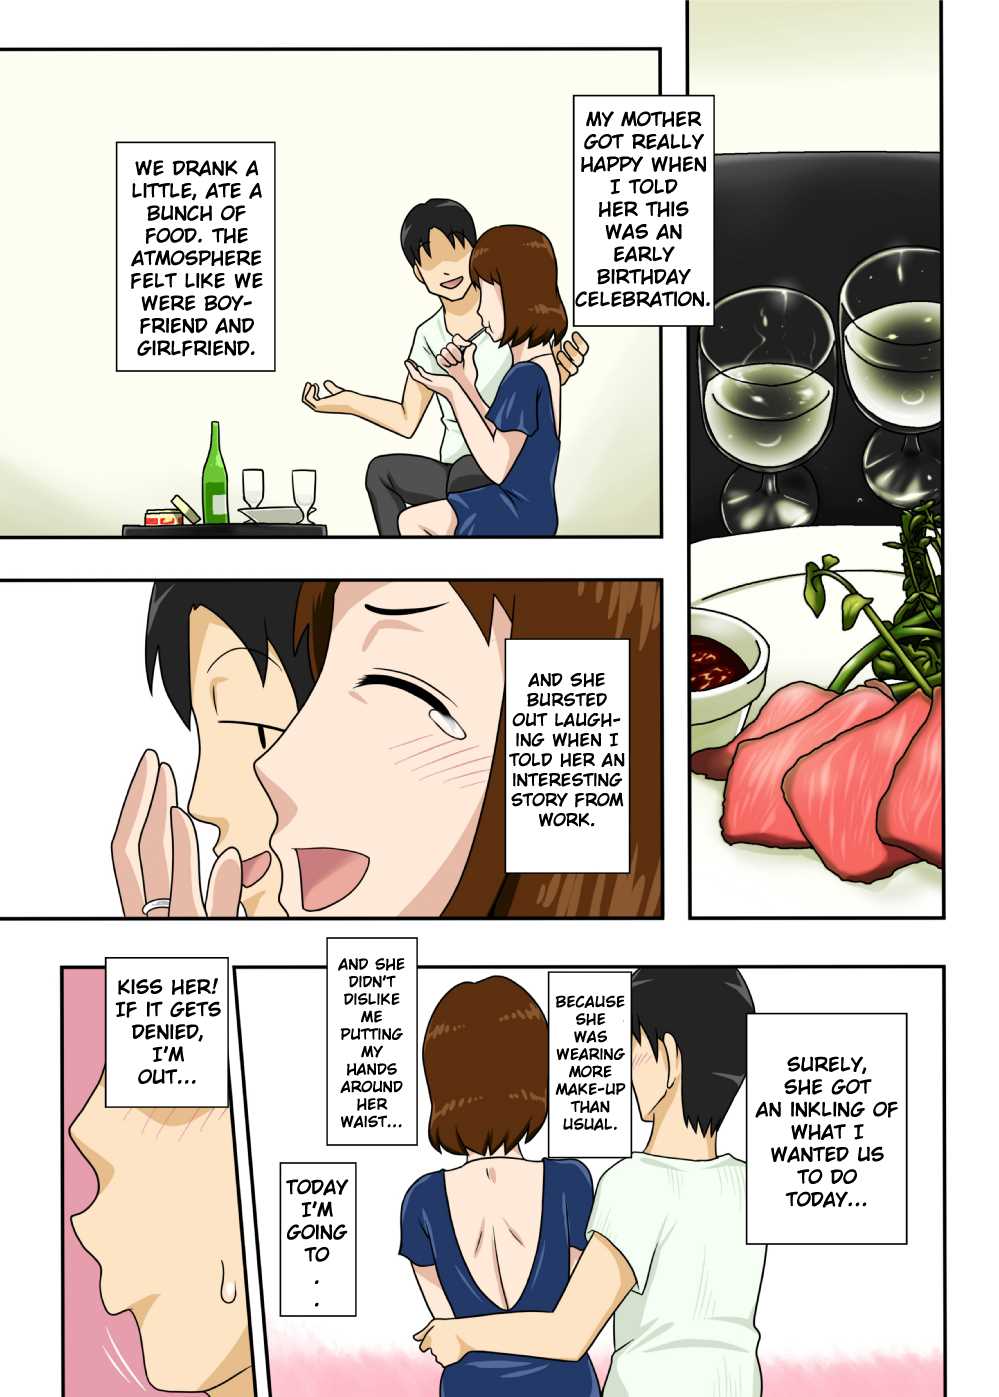 Page 23 | For This Reason, While Naked, I Tried To Ask My Mom - Original  Hentai Doujinshi by Freehand Tamashii - Pururin, Free Online Hentai Manga  and Doujinshi Reader